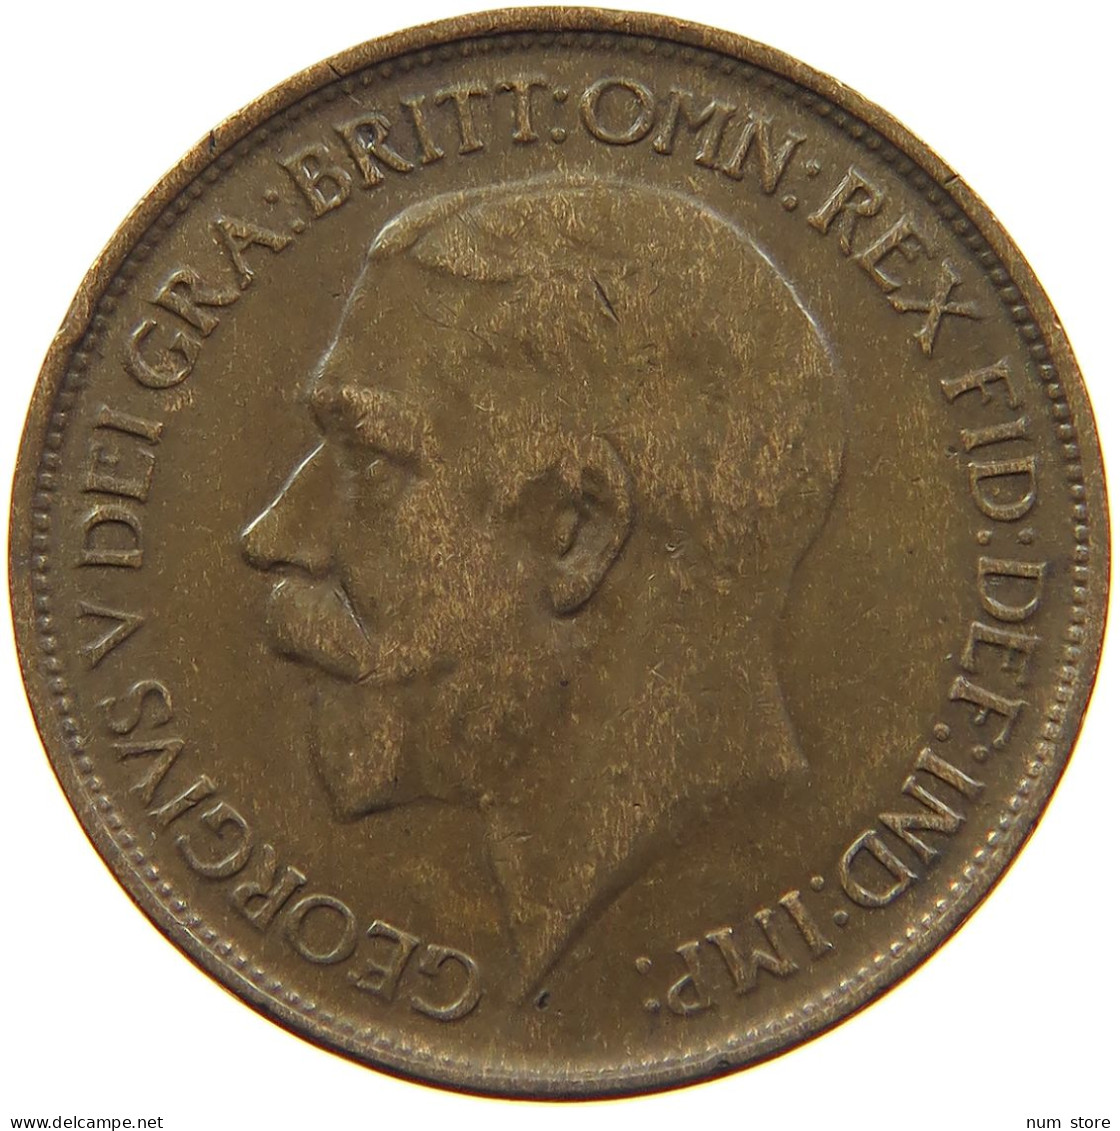 GREAT BRITAIN 1/2 PENNY 1916 GEORGE V. (1910-1936) #MA 101860 - C. 1/2 Penny